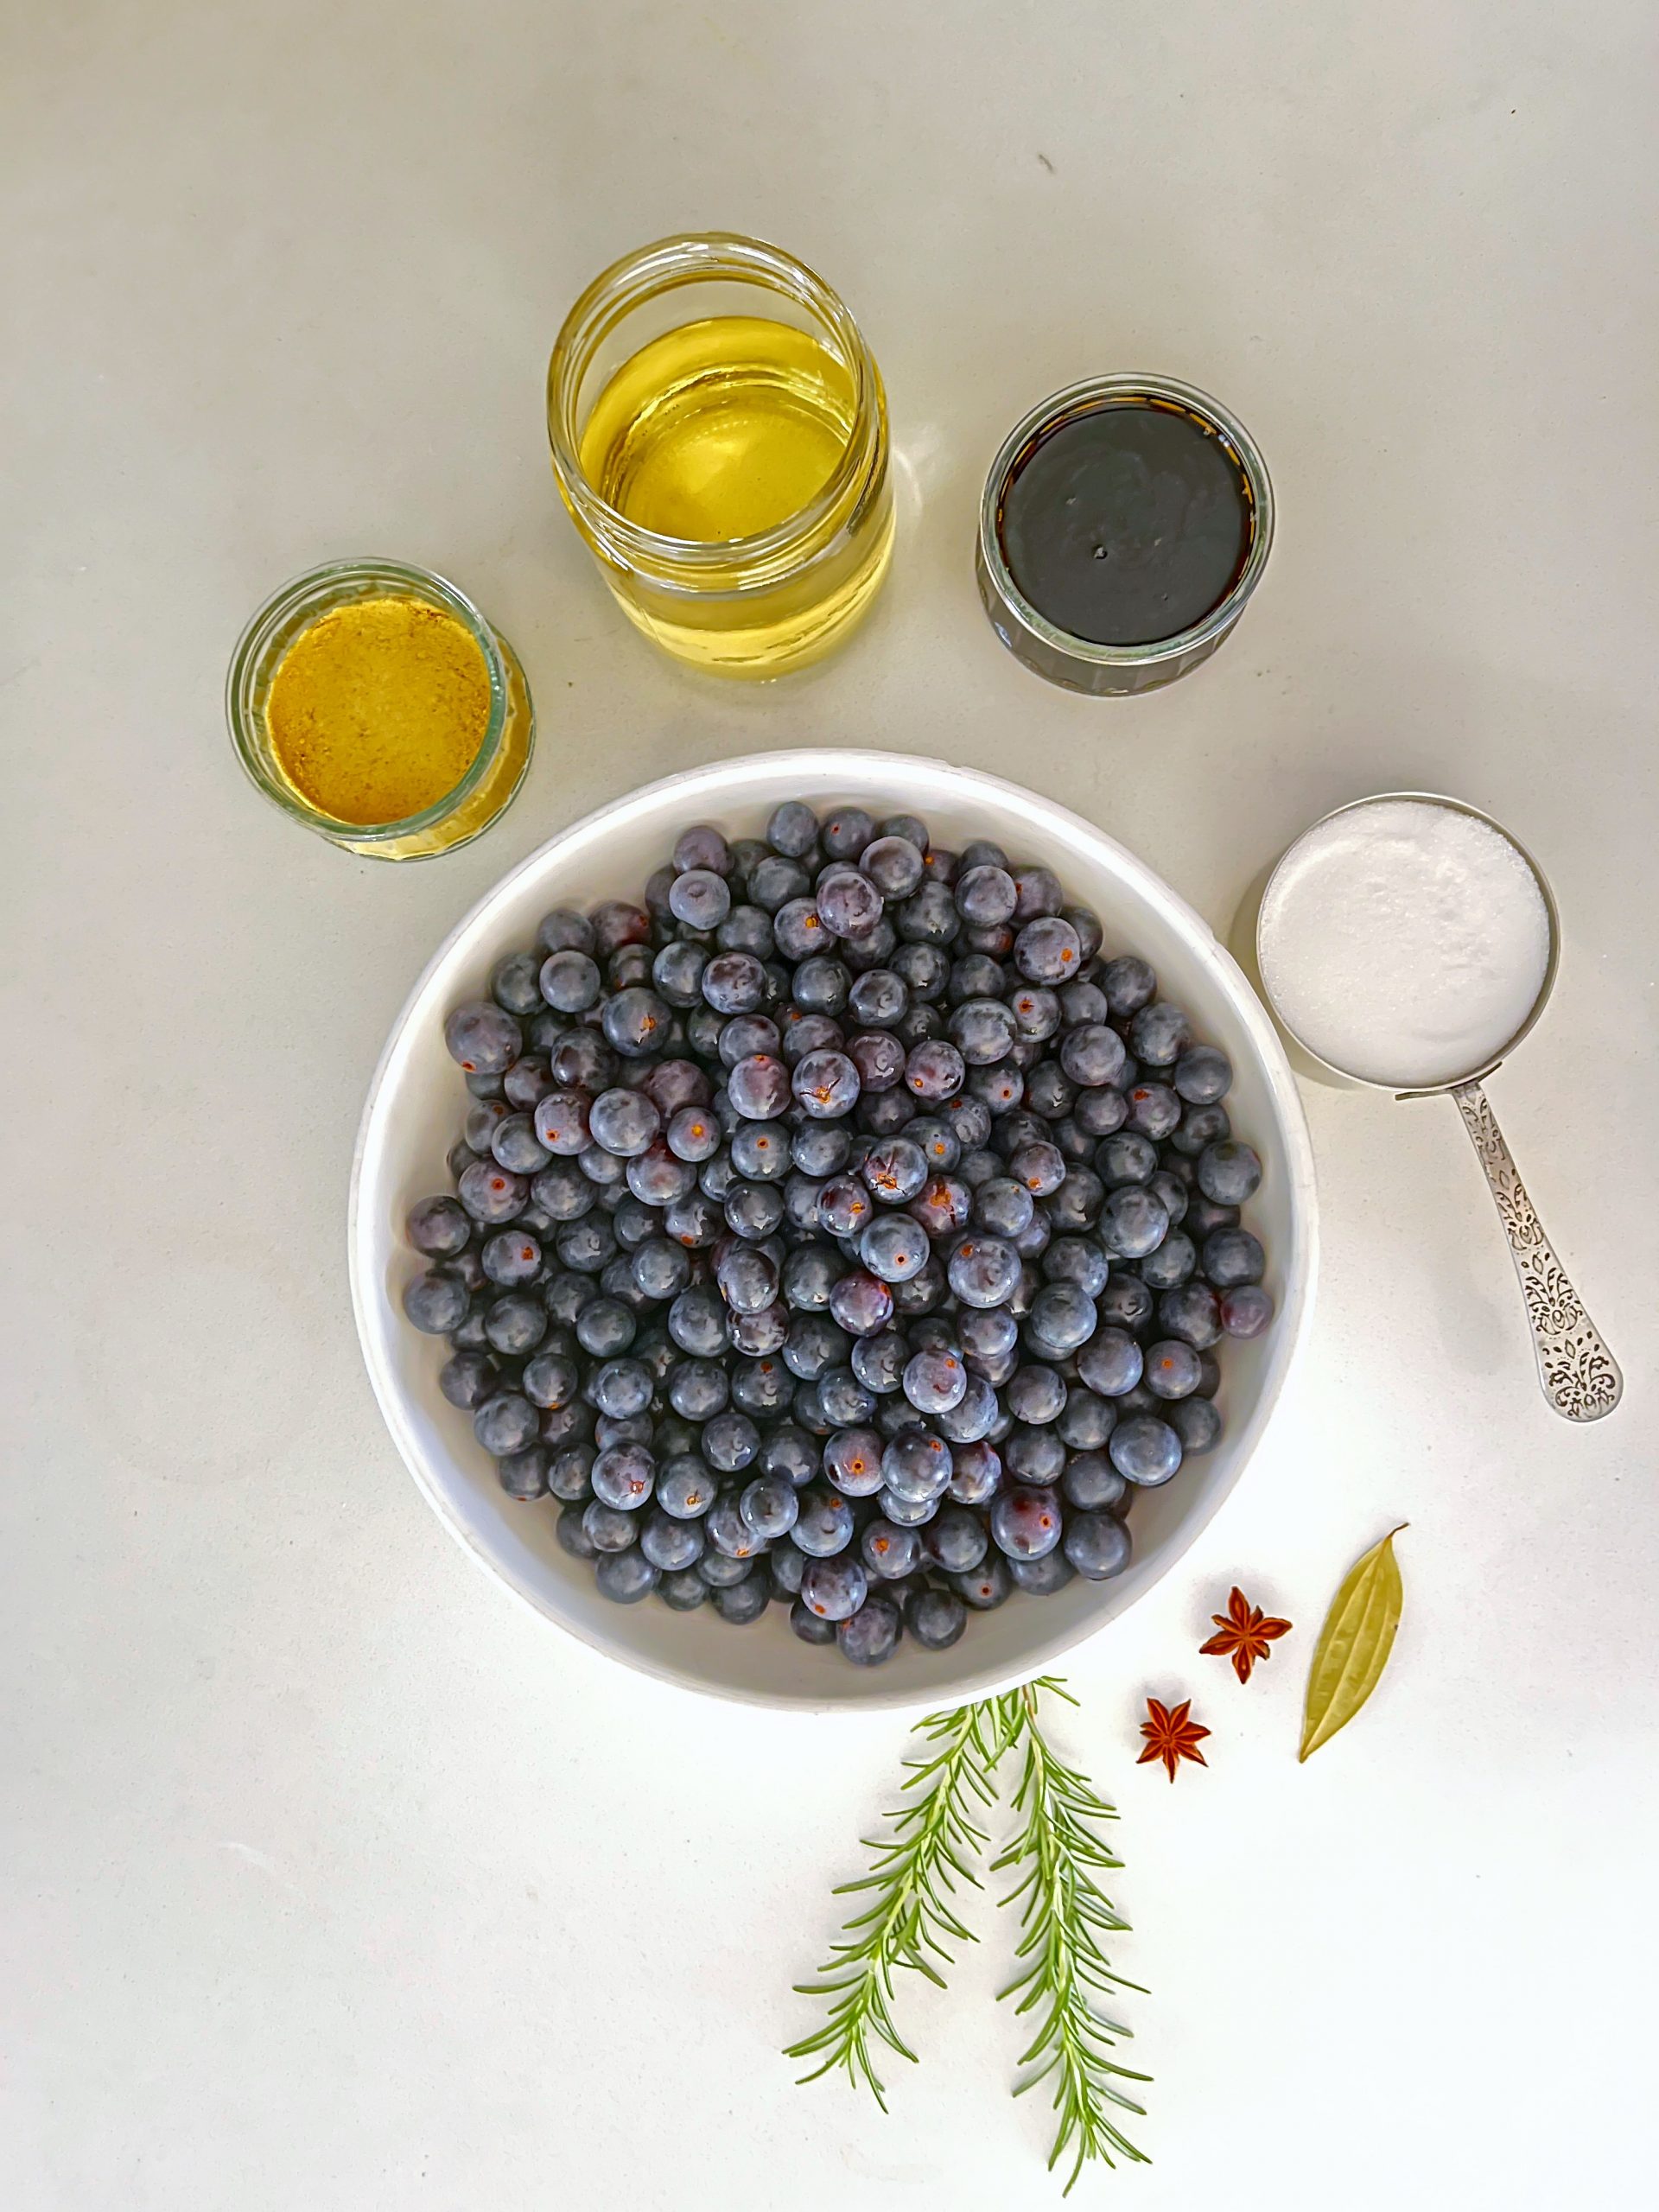 Concord Grapes Jam Recipe: gather the ingredients